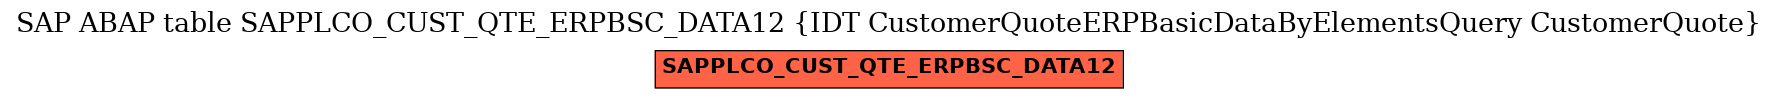 E-R Diagram for table SAPPLCO_CUST_QTE_ERPBSC_DATA12 (IDT CustomerQuoteERPBasicDataByElementsQuery CustomerQuote)